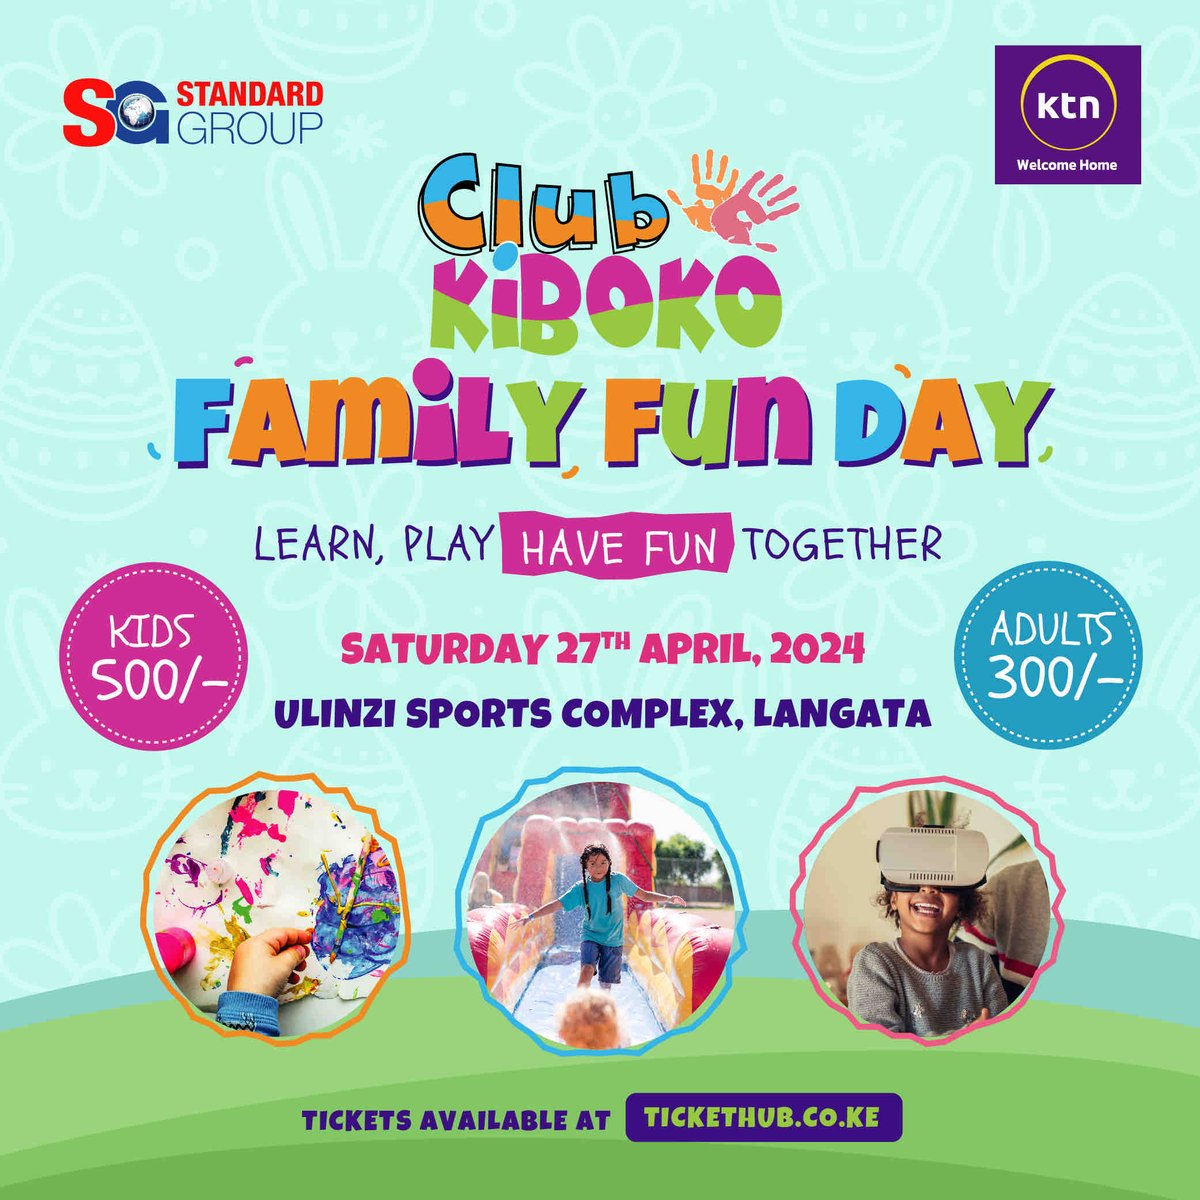 Experience the magic of Club Kiboko Family Fun Day on the 27th of April!🎉🤸‍♀️From thrilling slides to virtual reality adventures, there’s something for everyone.🥳 Reserve your tickets today at tickethub.co.ke/event/music-an… #ClubKibokoFamilyFunDay